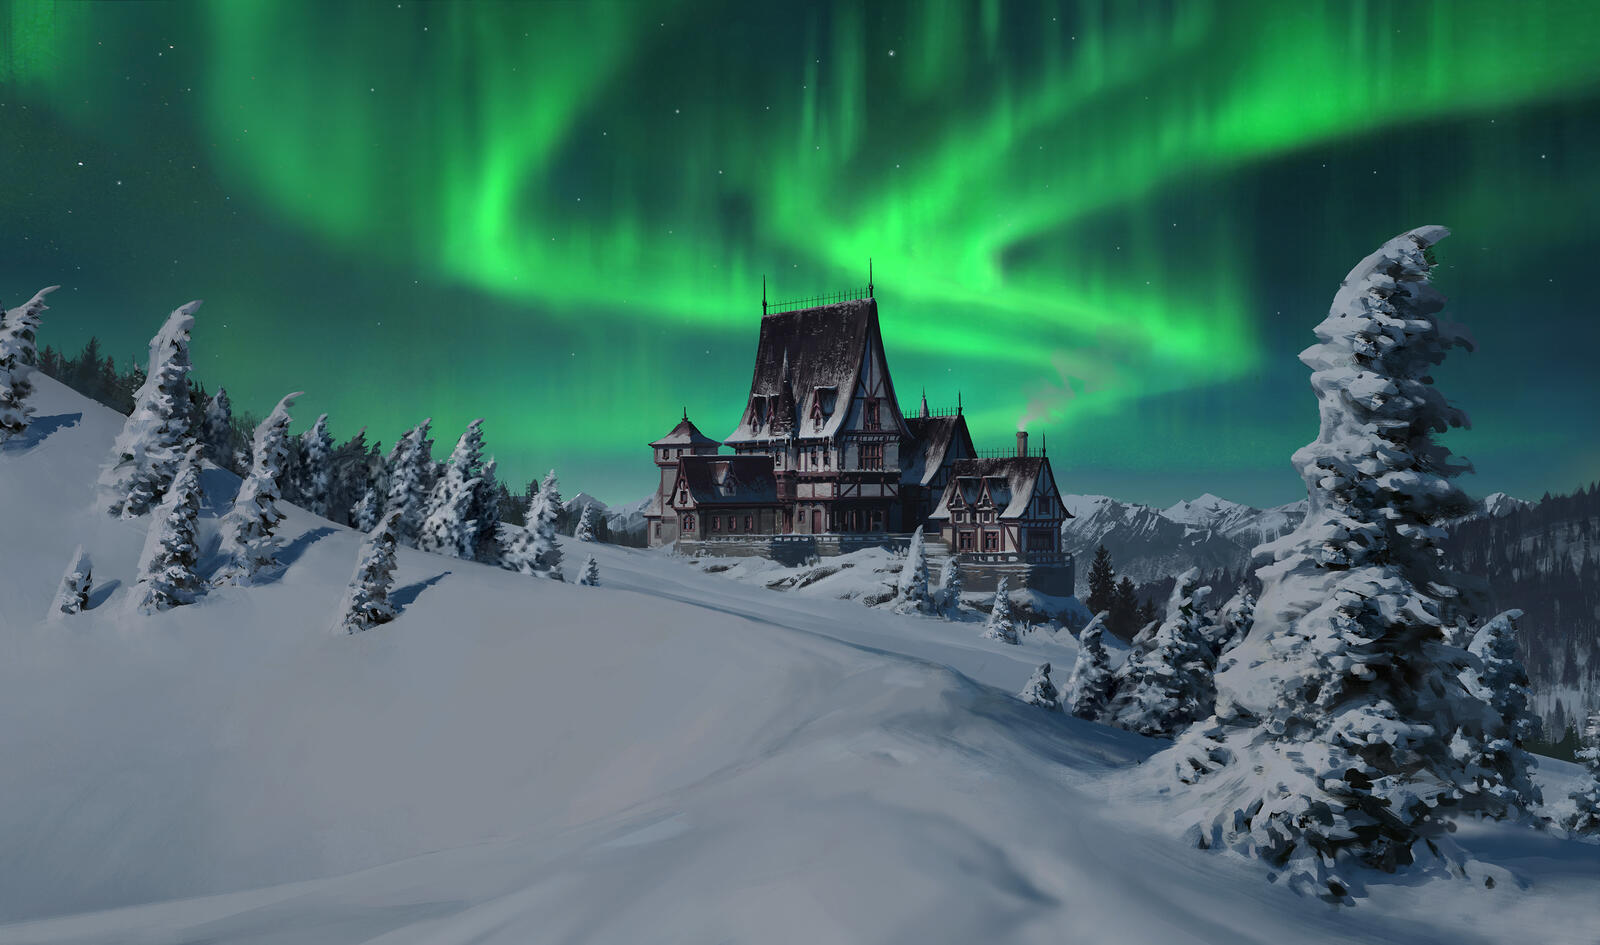 Free photo An ancient palace at the edge of the earth in snowdrifts and the northern lights in the sky